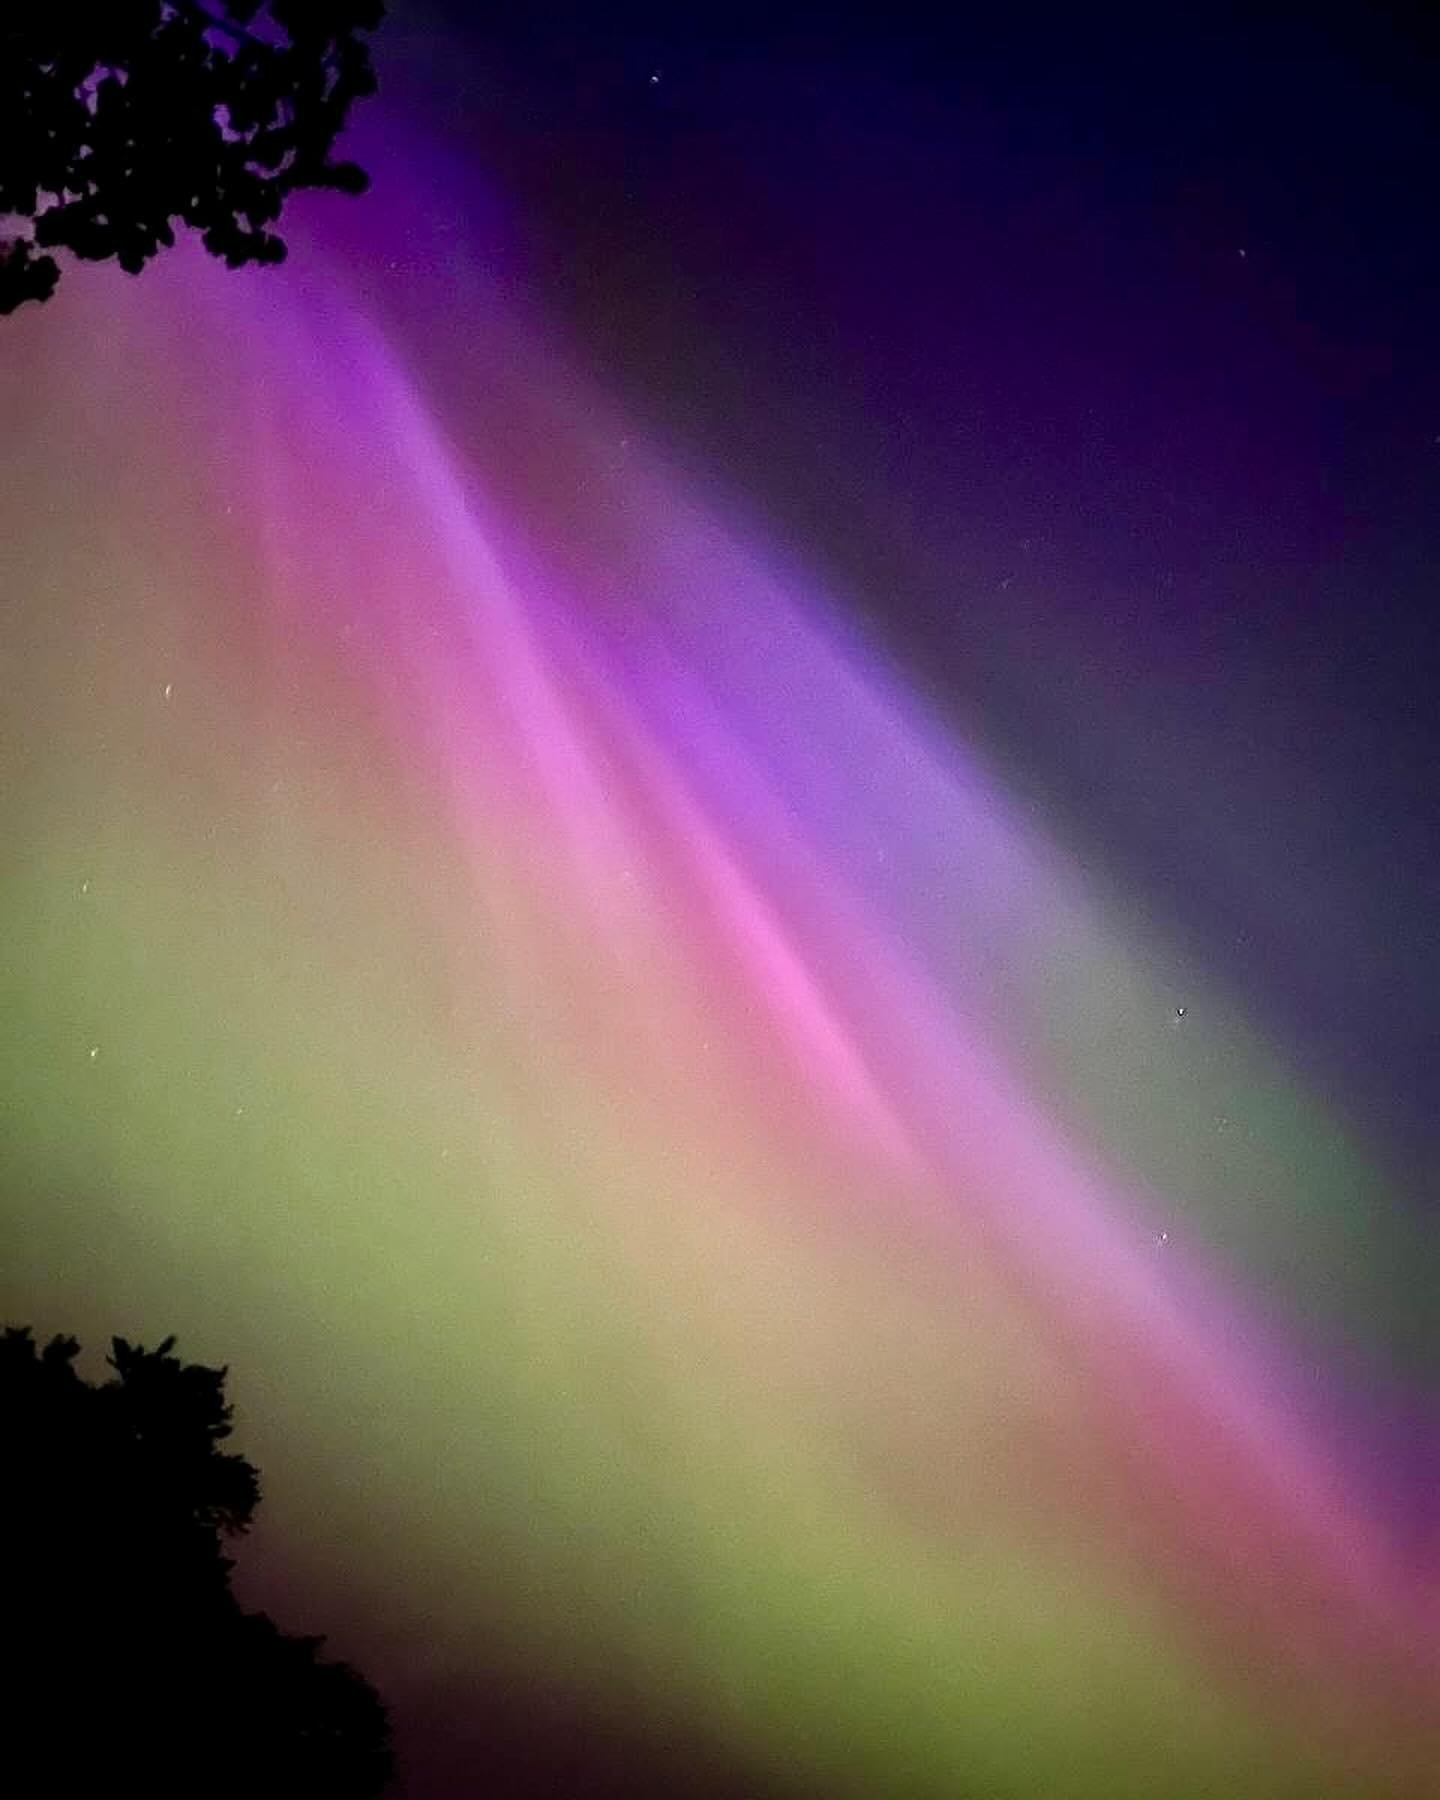 We were in bed half asleep when my Mum and brother called to say, &ldquo; look outside, the Northern Lights are visible!&rdquo; Well, I wasn&rsquo;t expecting to witness such a spectacular celestial phenomenon that would literally take my breath away